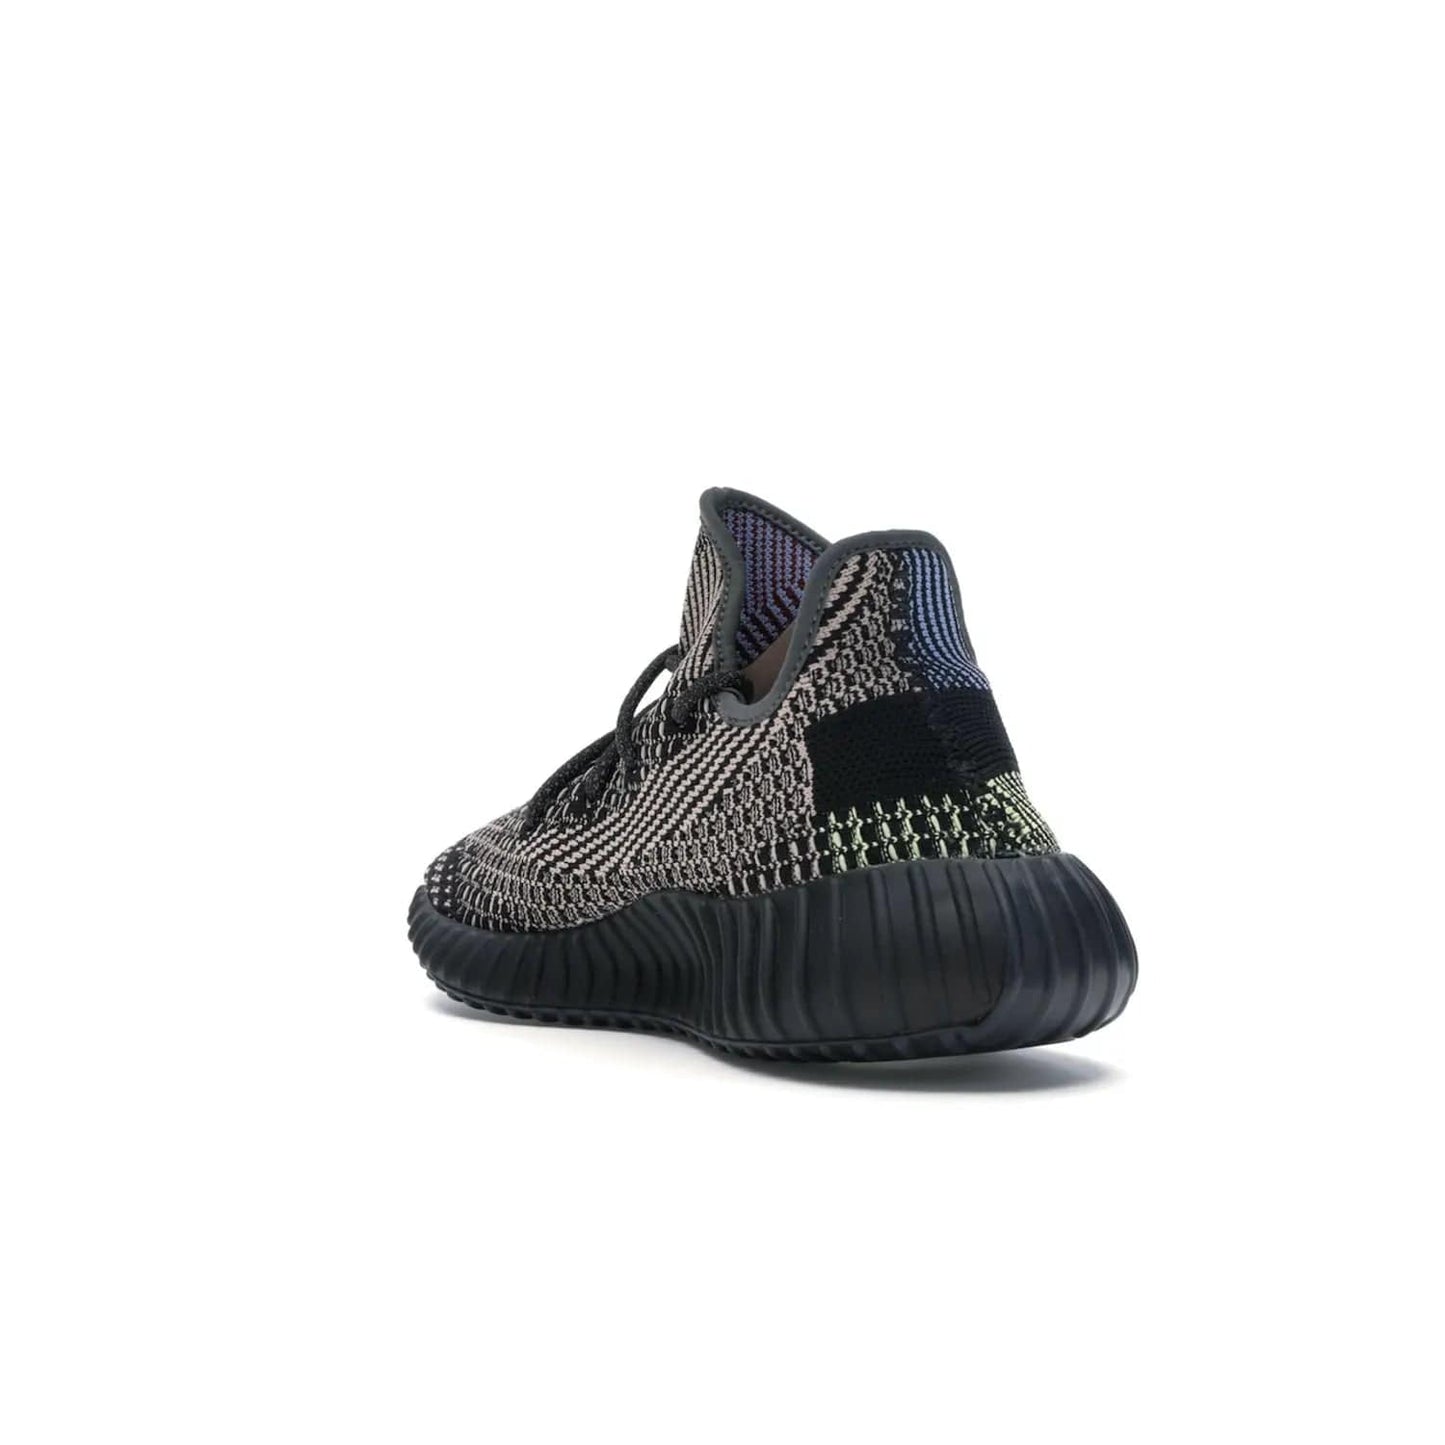 adidas Yeezy Boost 350 V2 Yecheil (Non-Reflective) - Image 25 - Only at www.BallersClubKickz.com - Make a statement with the eye-catching adidas Yeezy Boost 350 V2 Yecheil Non-Reflective. Featuring a spectrum of colorful hues, black upper, Boost cushioning, and black side stripe, the sneaker brings a luxe yet playful finish to any outfit.